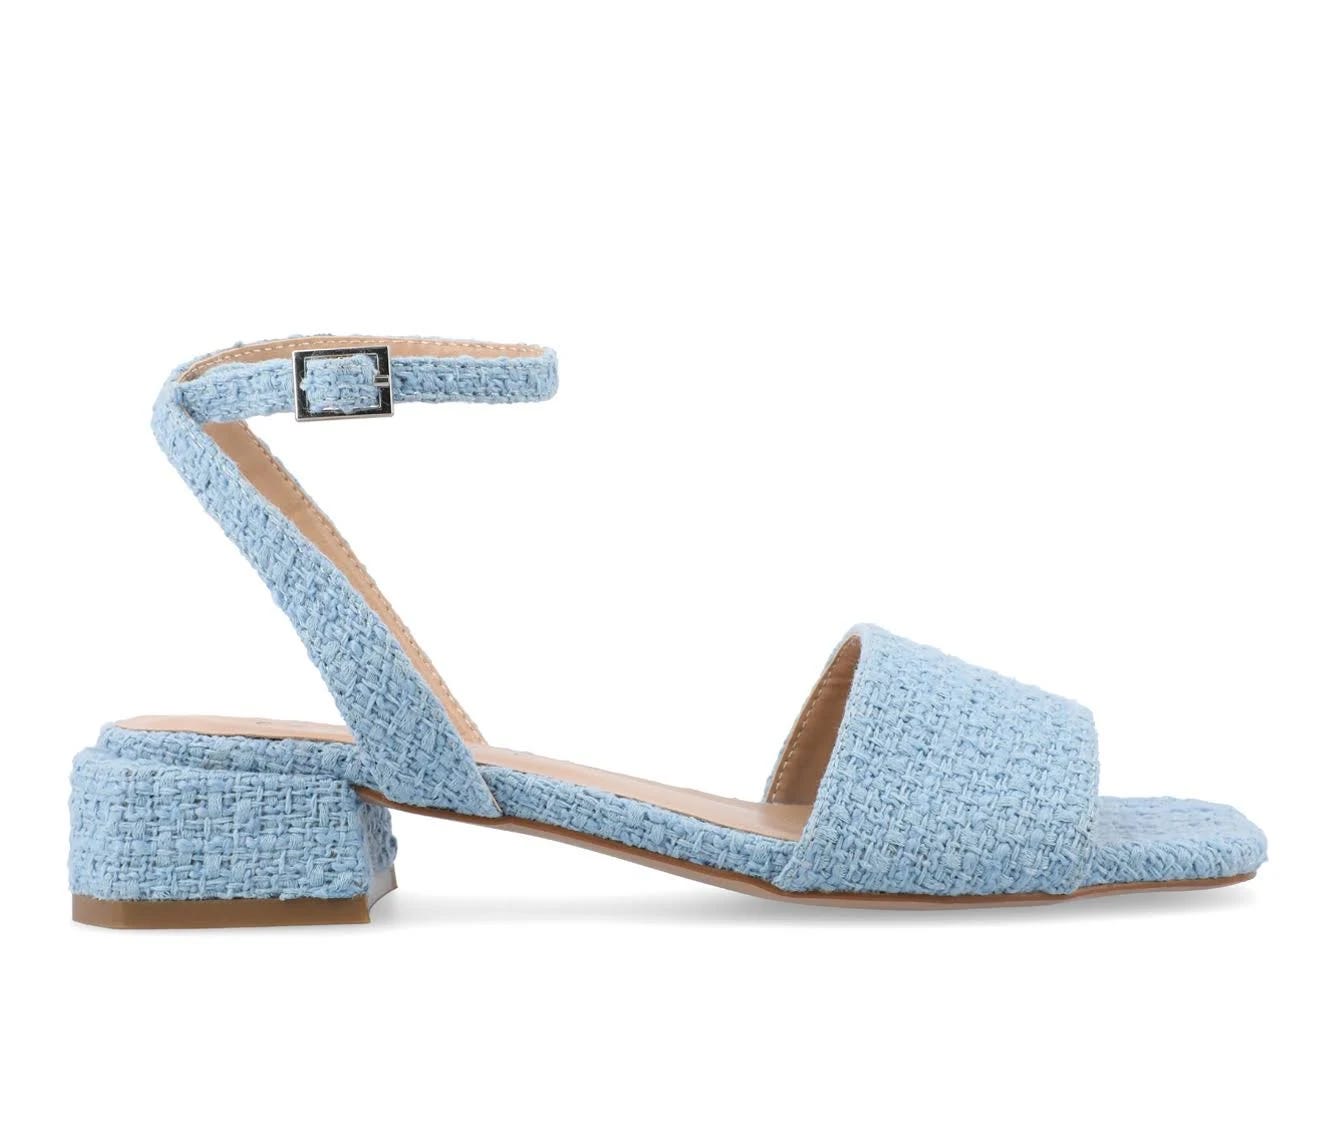 Stylish Journee Collection Women's Blue Adleey Flat Sandals with Memory Foam Insole | Image